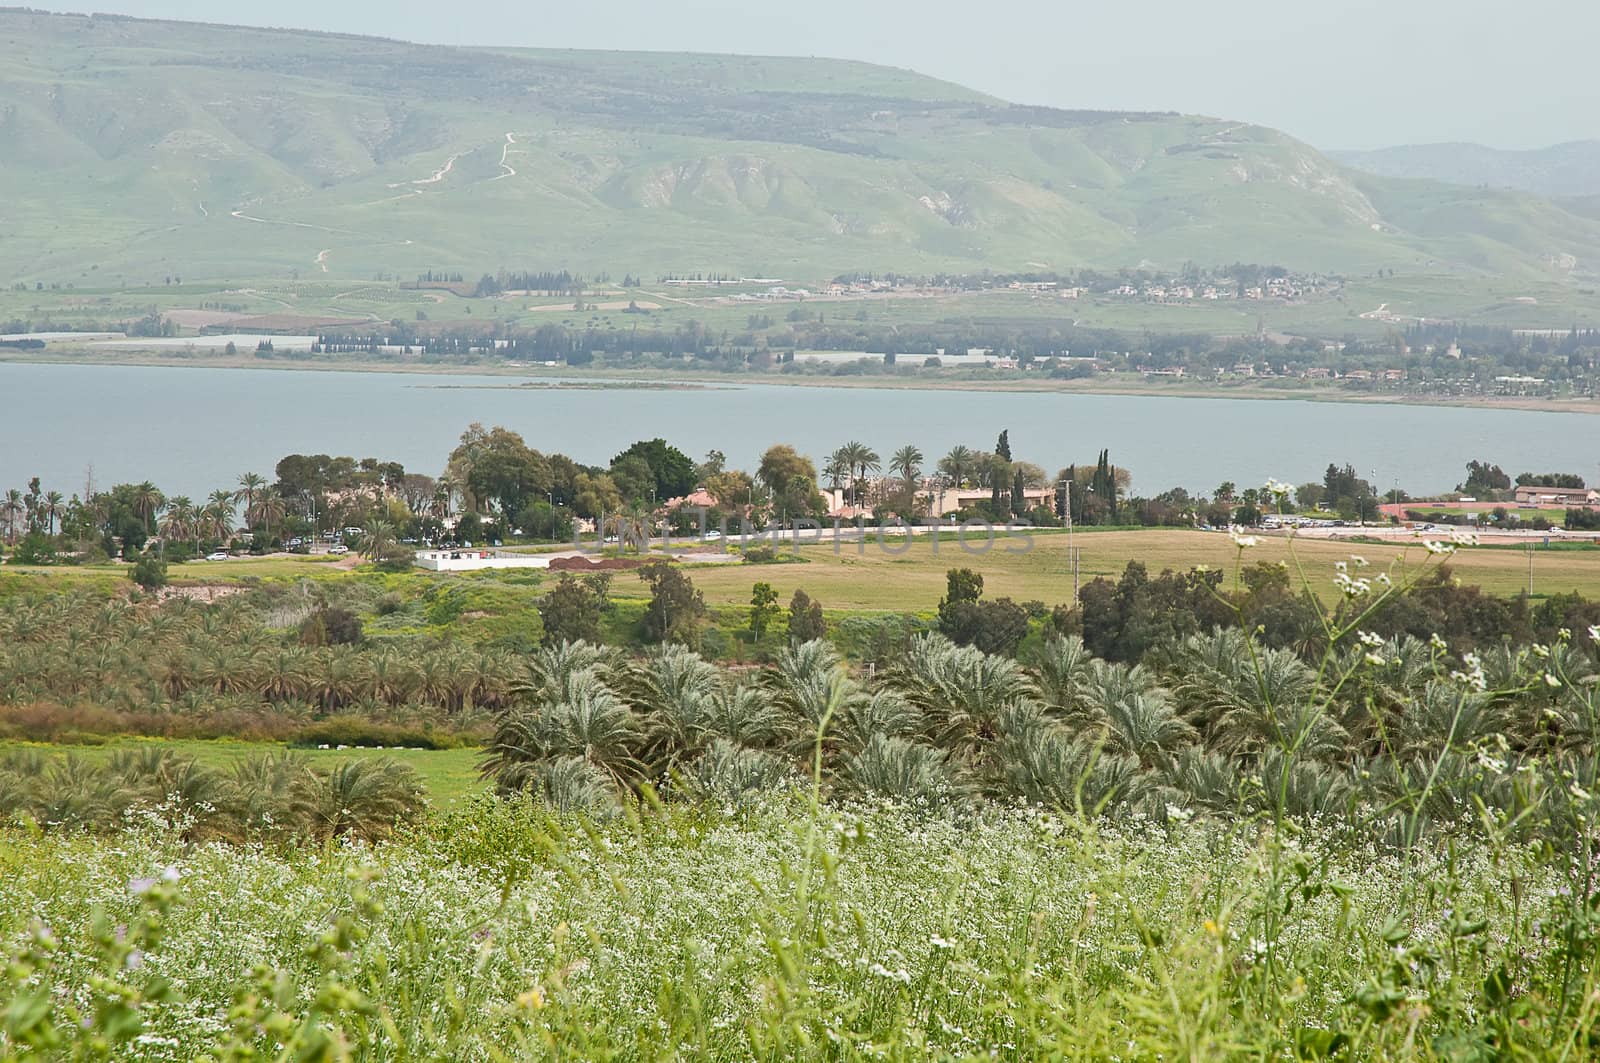 View of the sea of Galilee (Kineret lake) , Israel